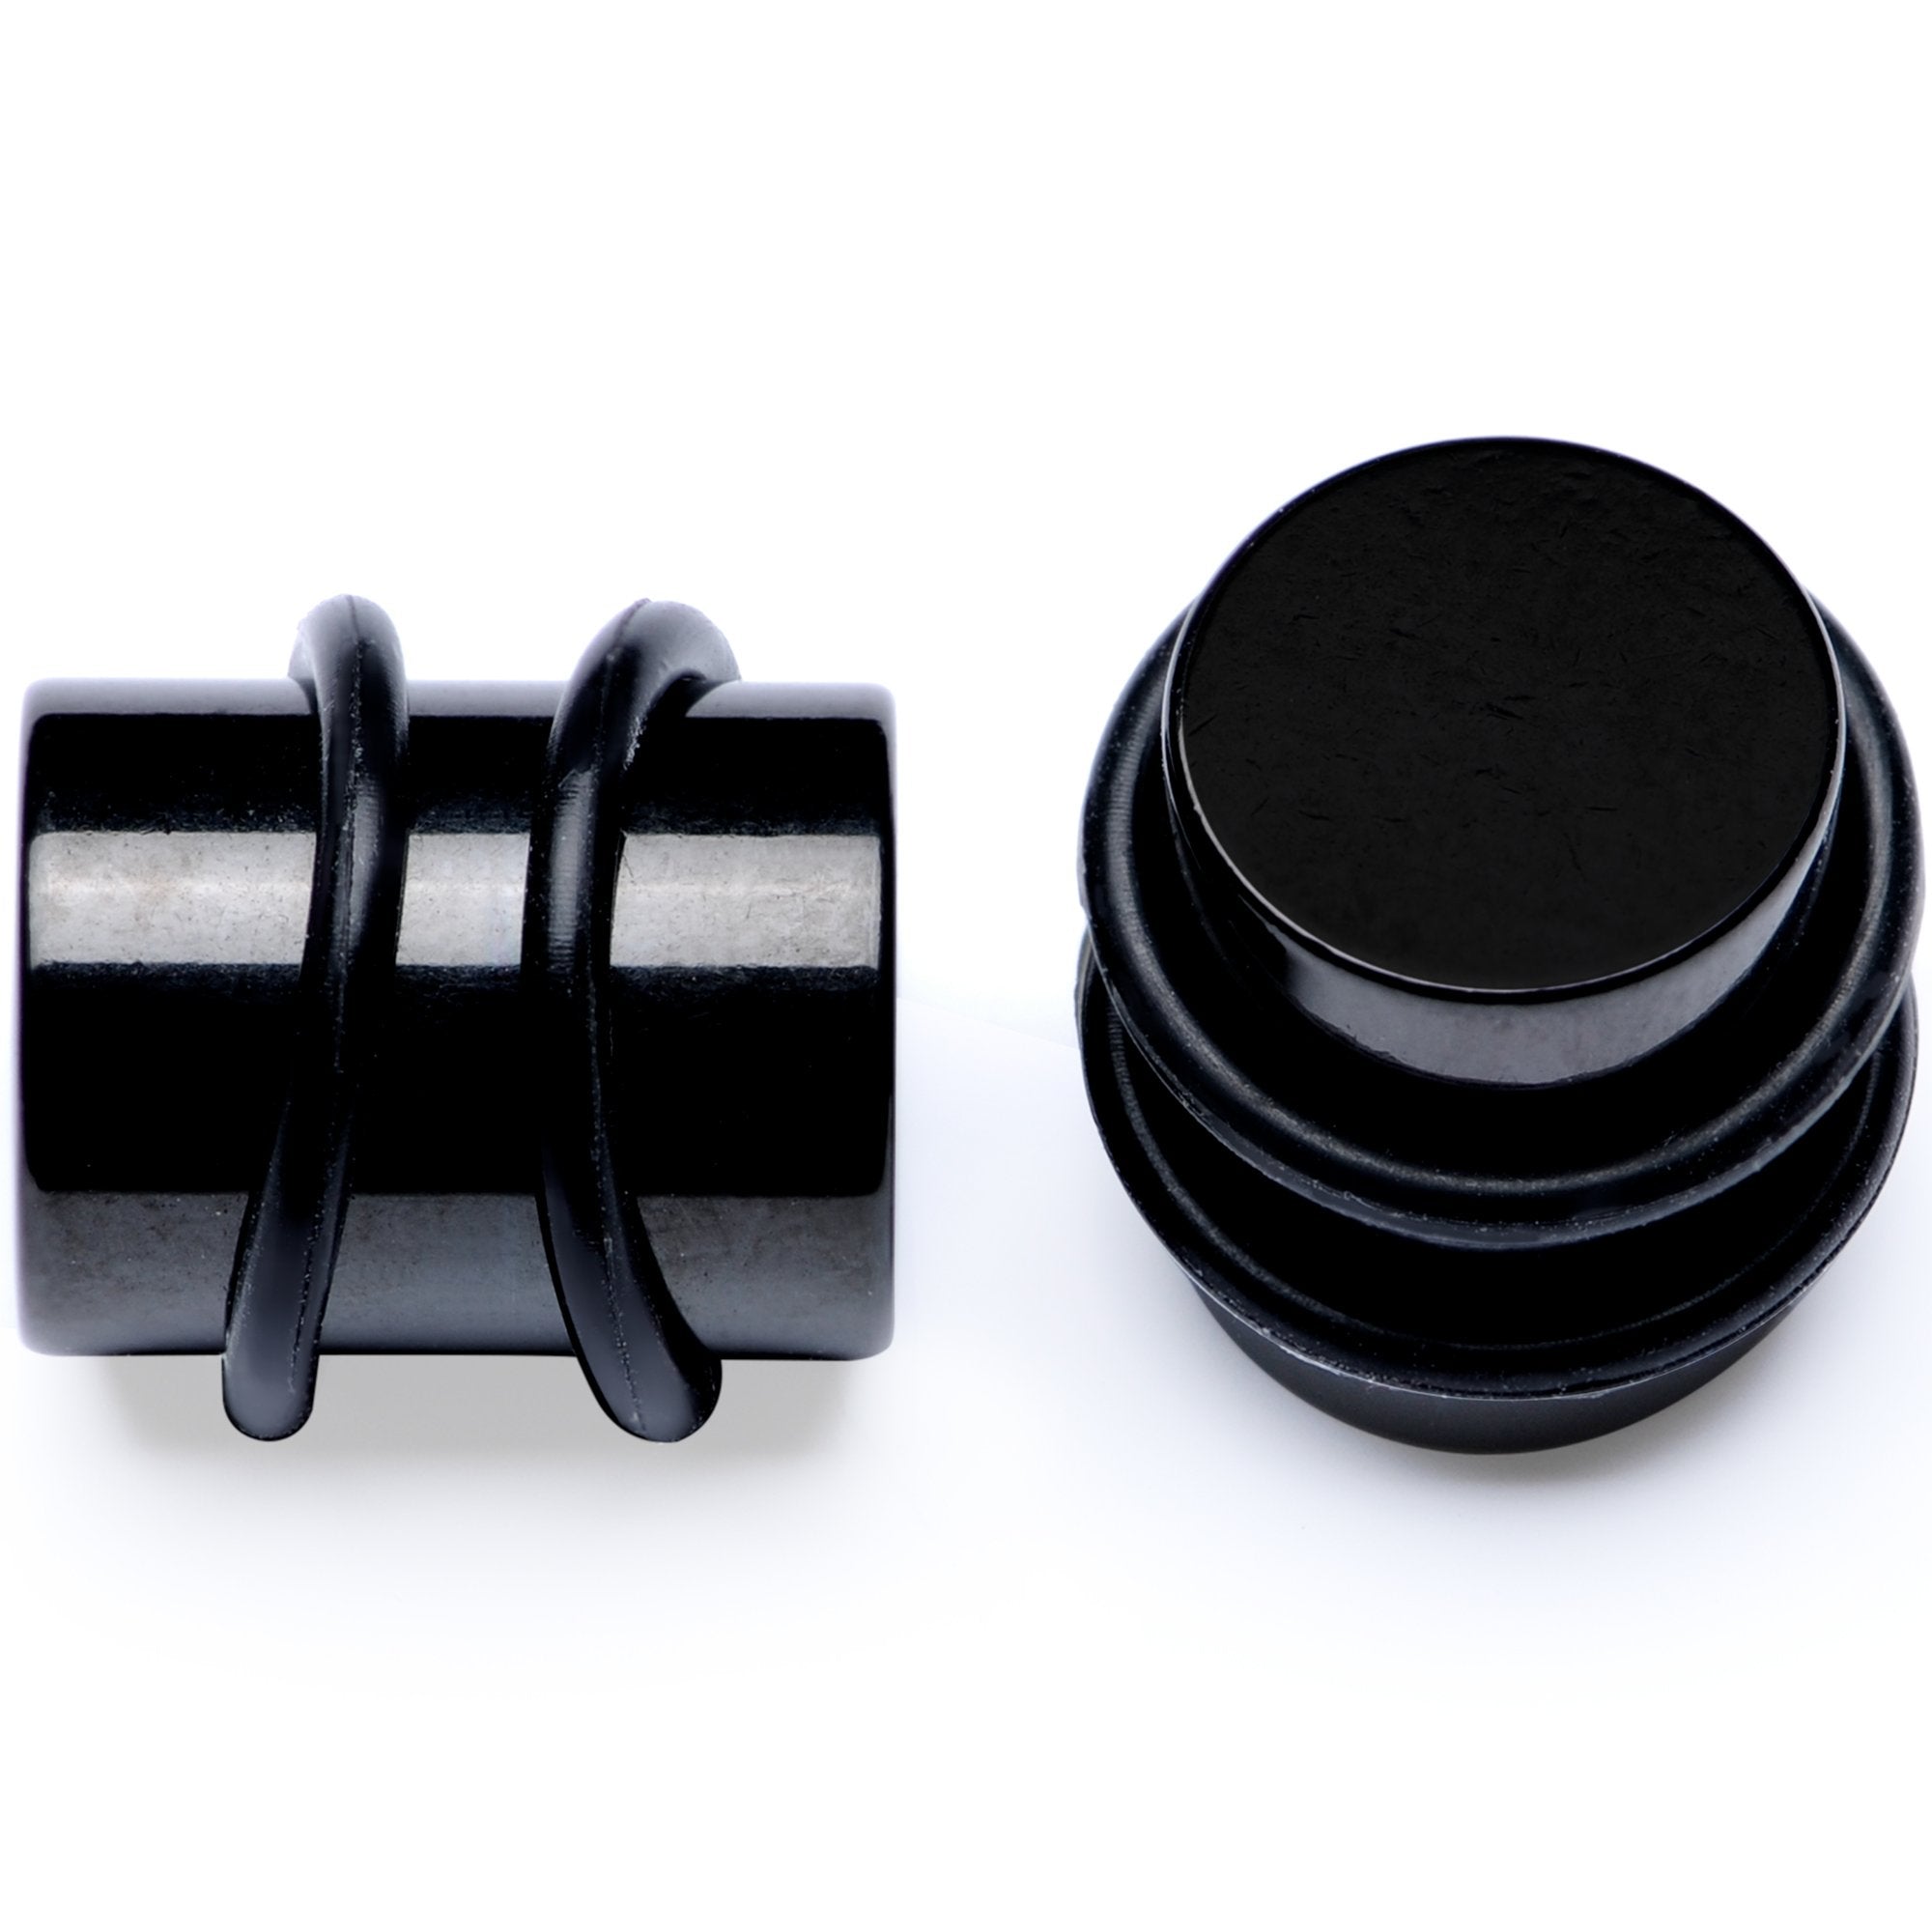 Black PVD Straight Plug and Taper Set Sizes 5mm to 10mm